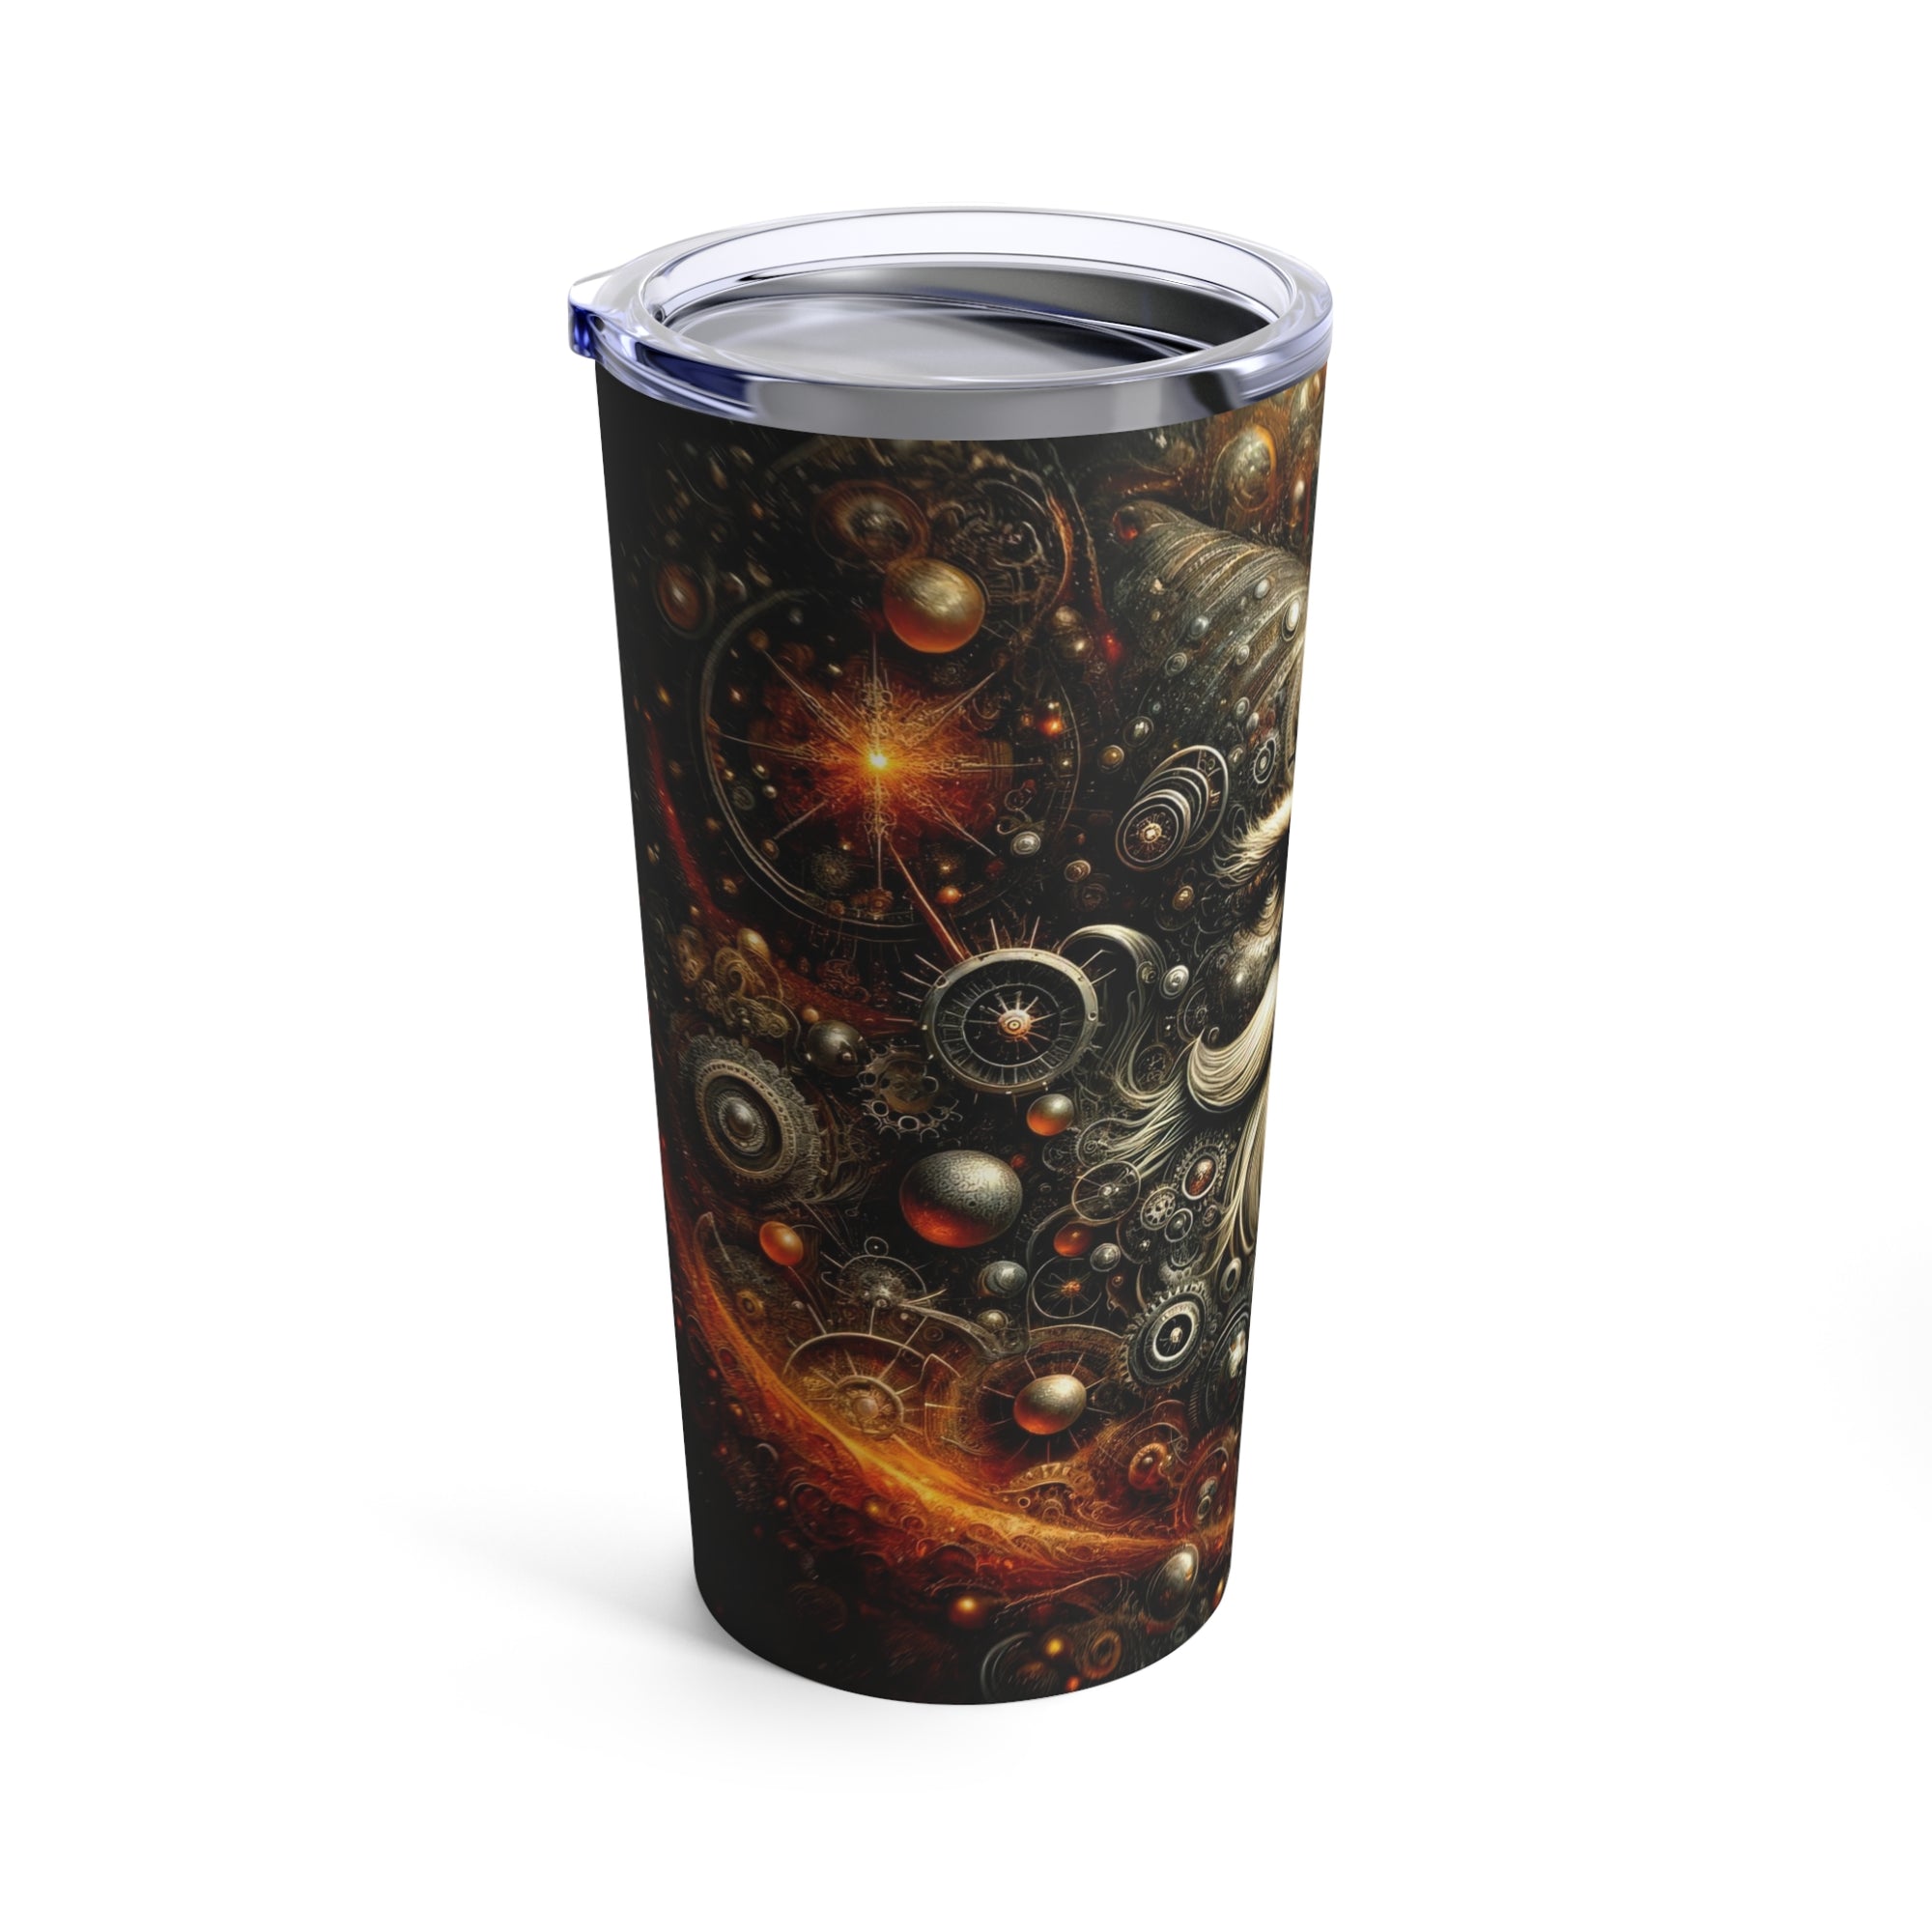 Aeonian Gears of the Ancient Tumbler 20oz